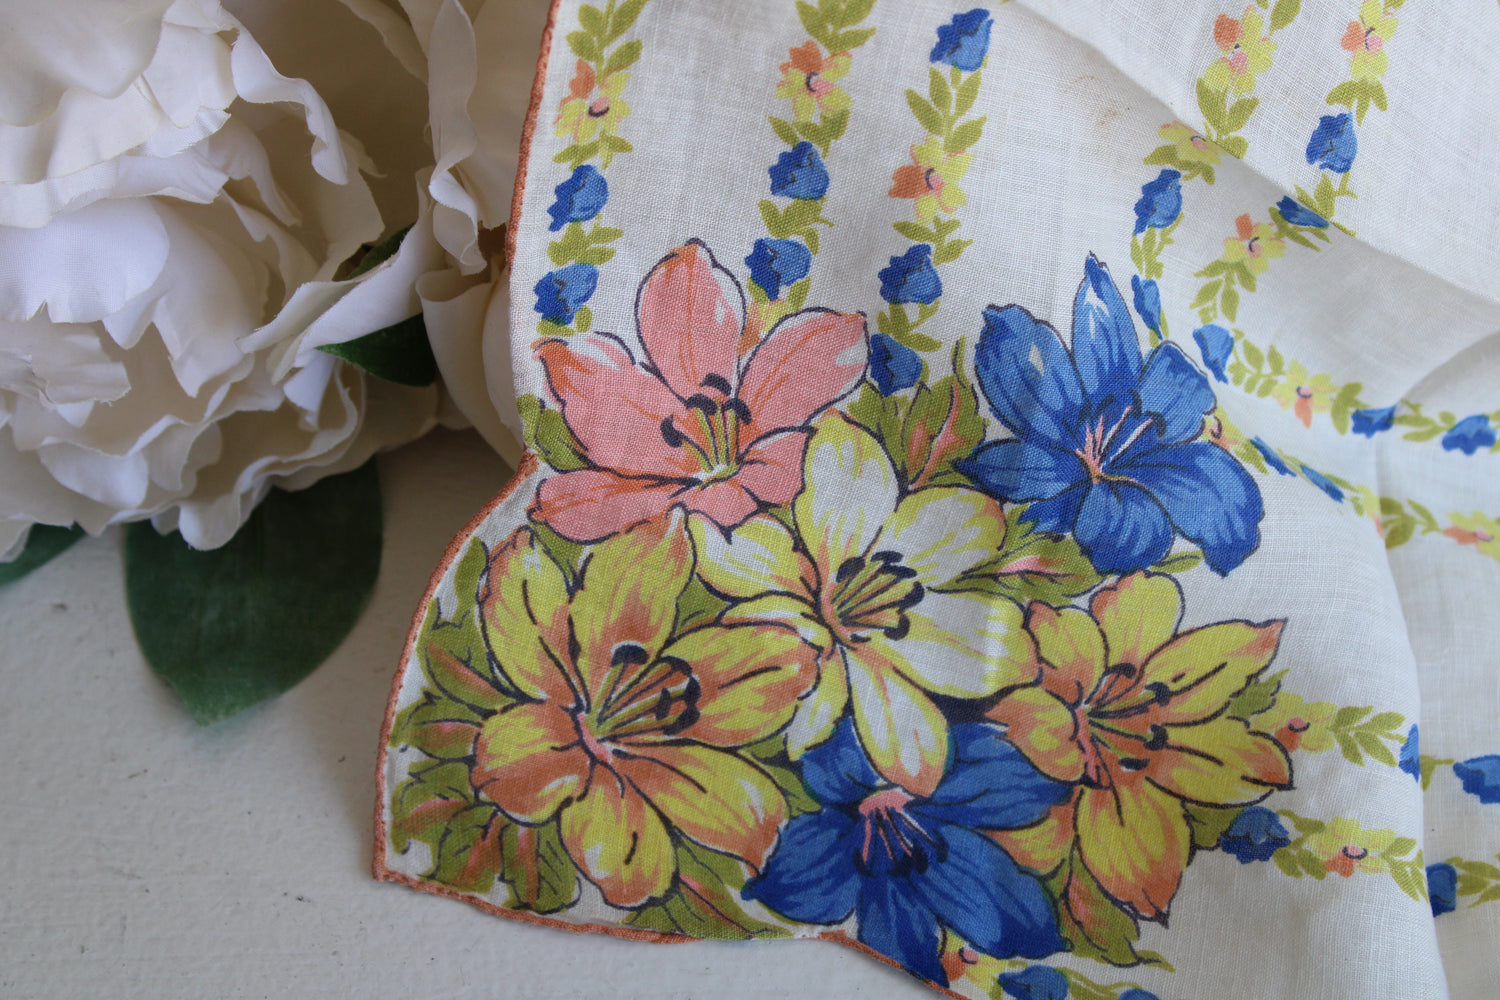 Vintage 1950s Cotton Hanky with Blue and Yellow Flowers